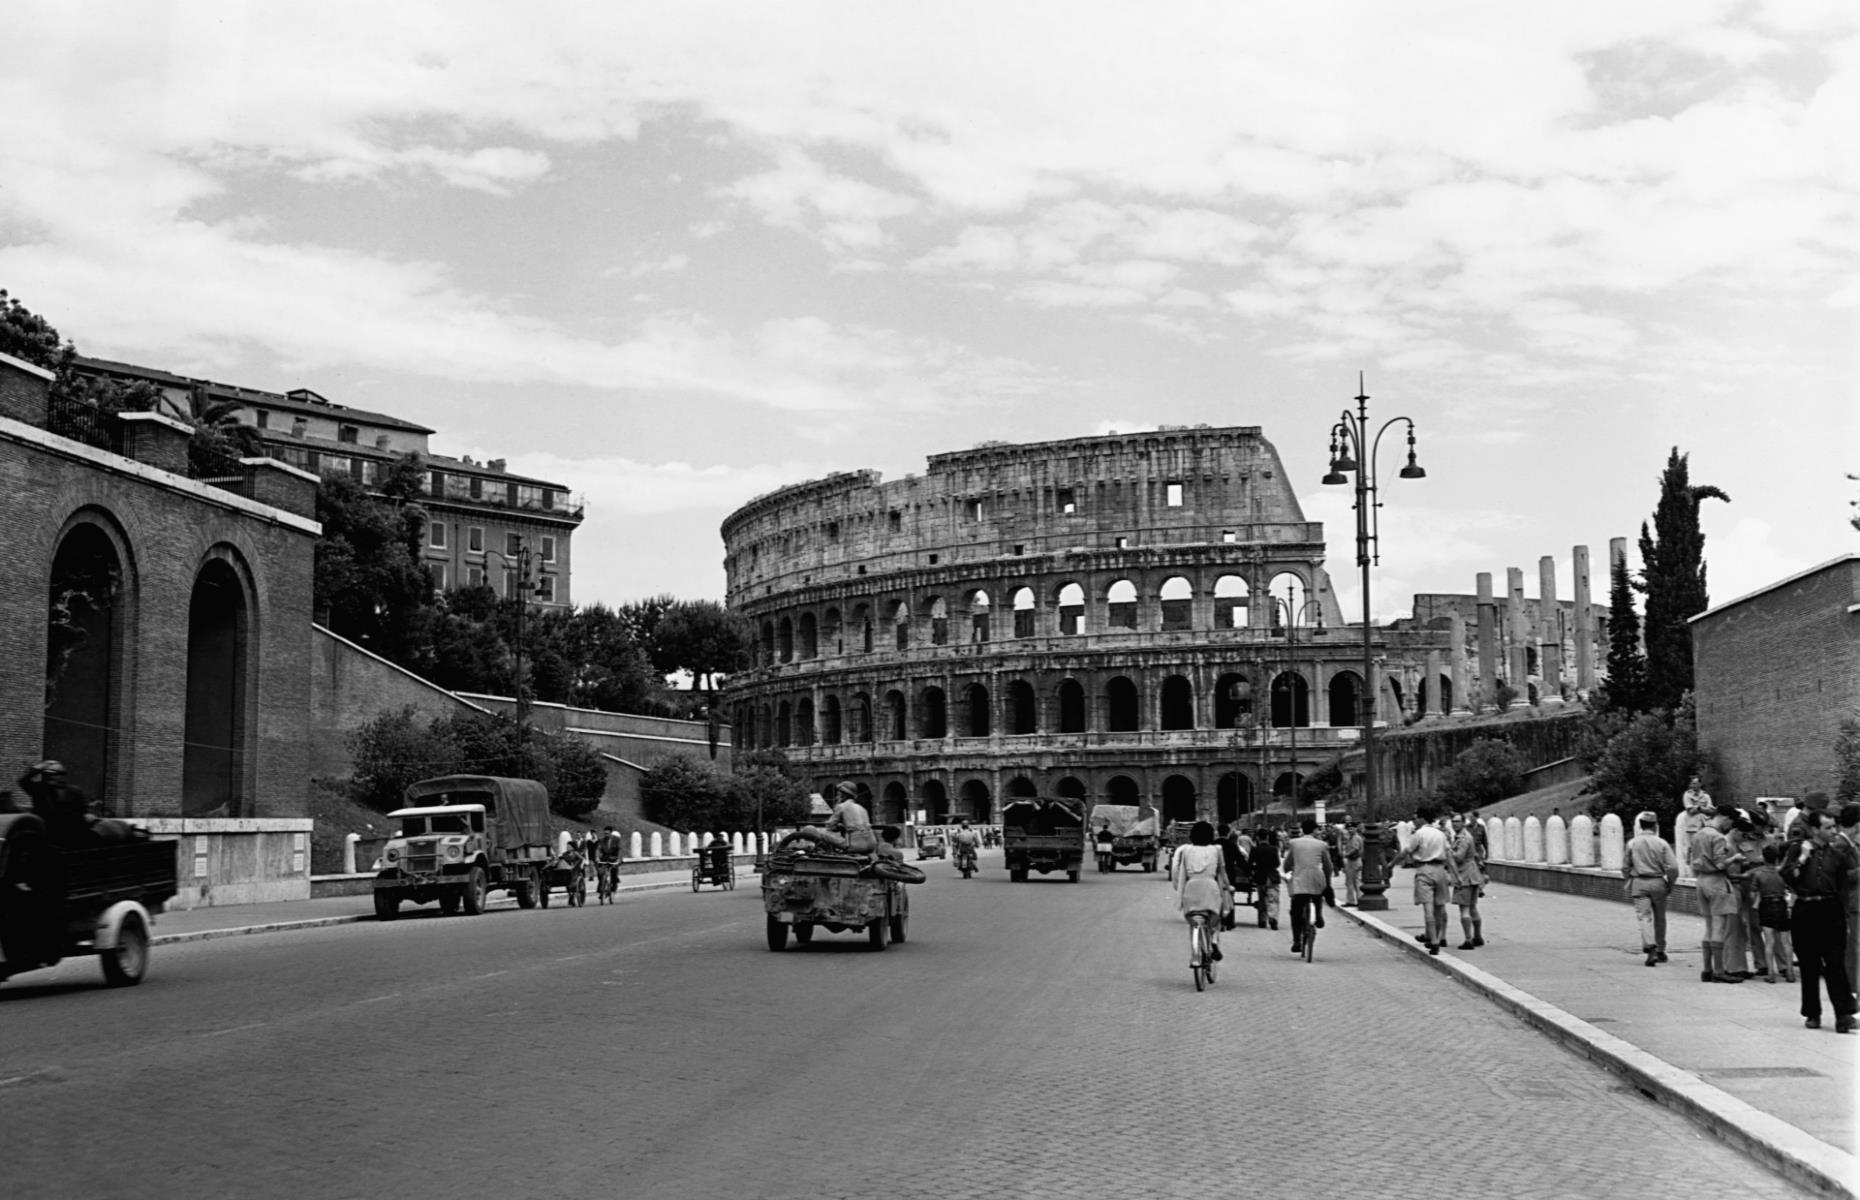 <p>The Colosseum is a large stone amphitheatre in Rome which was built in AD 70-72. Commissioned by the Flavian Emperor Vespasian, who ruled the Roman Empire between AD 69 and 79, it was created to host gladiatorial combats and other forms of public entertainment. The city of <a href="https://www.loveexploring.com/guides/78227/explore-rome-what-to-do-where-to-eat-and-the-best-hotels">Rome</a> became popular with tourists in the mid-1800s, although political upheaval led to a decline in tourism in the 1870s that lasted until the end of the Second World War. Looking quiet in this shot from 1944, it wasn’t until the 1950s that tourism picked up again, thanks in part to popular movies including <em>Roman Holiday</em> and <em>La Dolce Vita</em> which were filmed in the city.</p>  <p><a href="https://www.loveexploring.com/galleries/96816/famous-landmarks-that-were-almost-destroyed?page=1"><strong>Now discover the famous landmarks that were almost destroyed</strong></a></p>